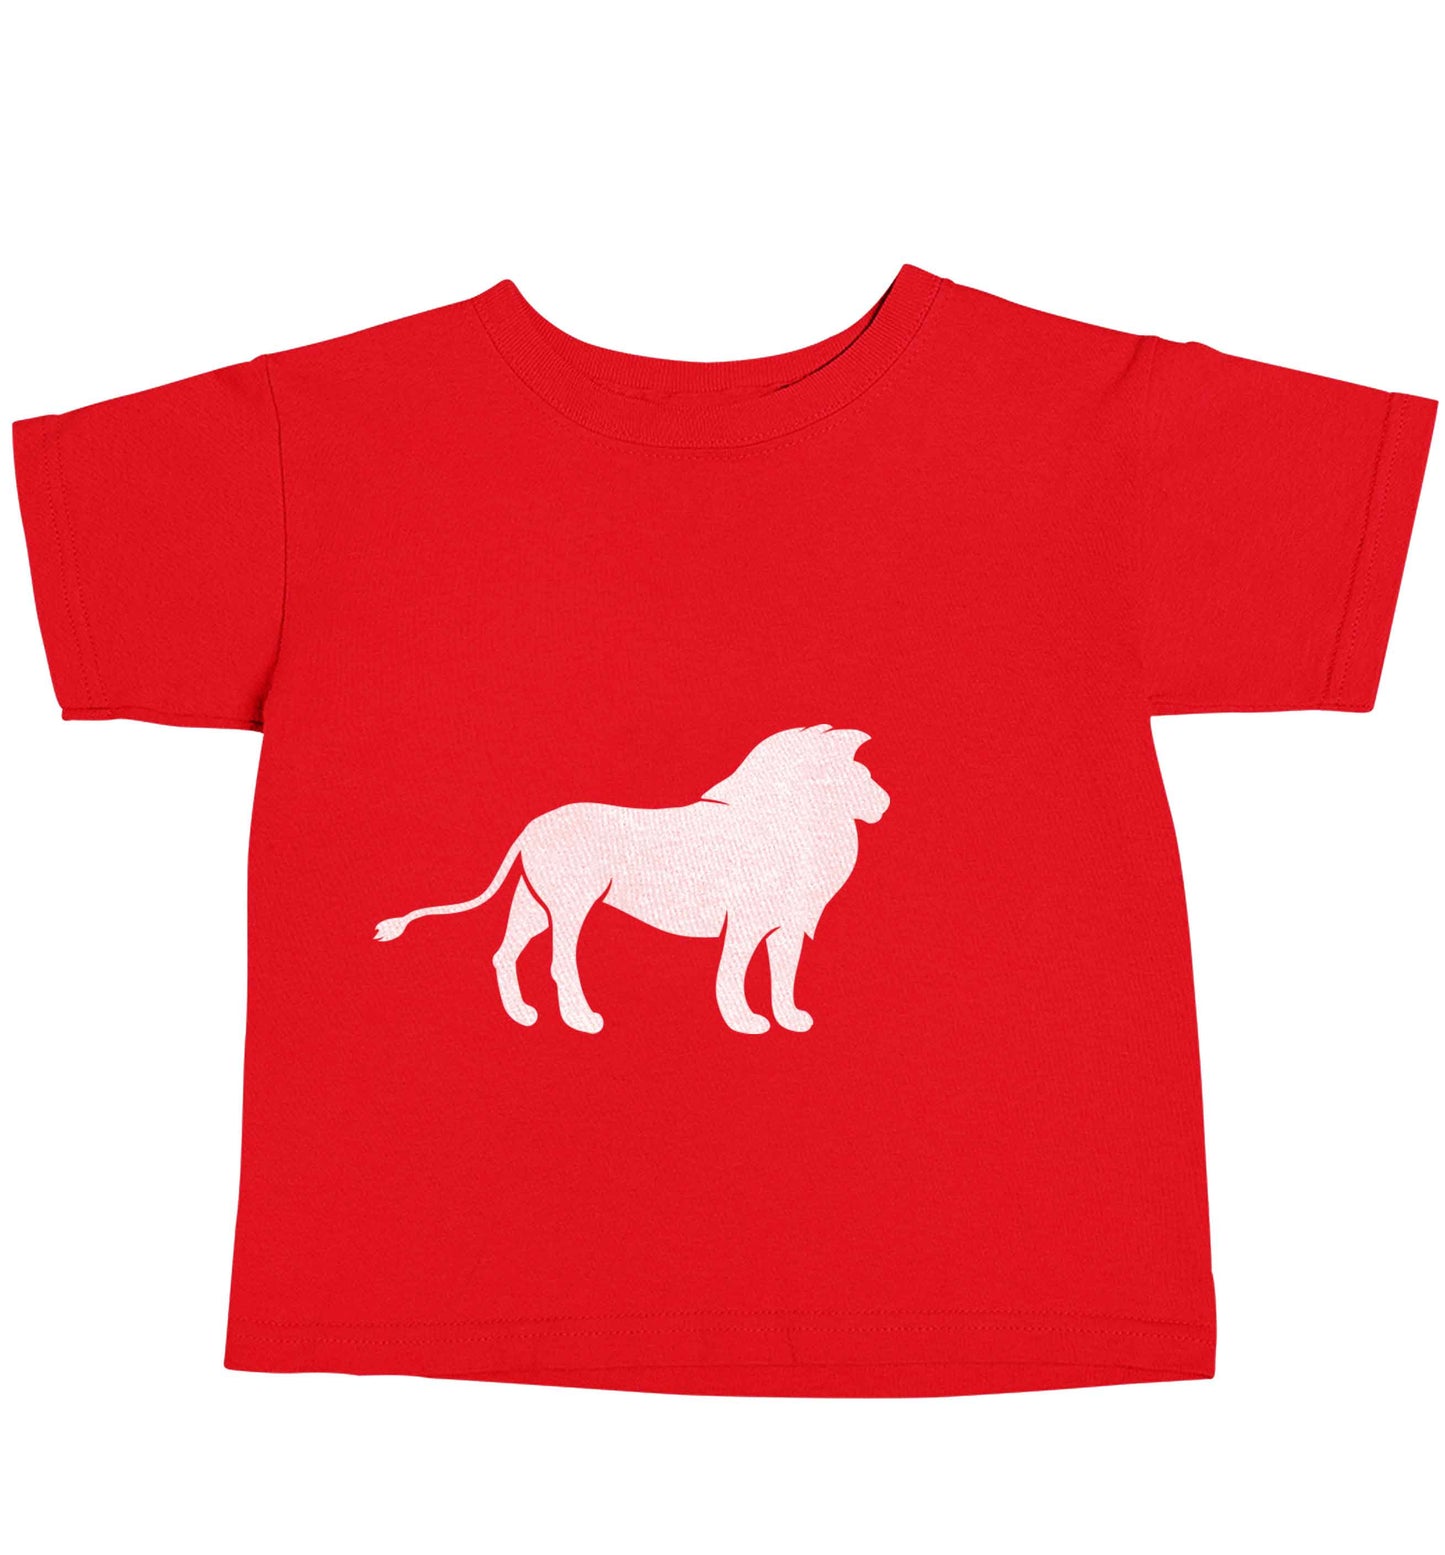 Gold lion red baby toddler Tshirt 2 Years